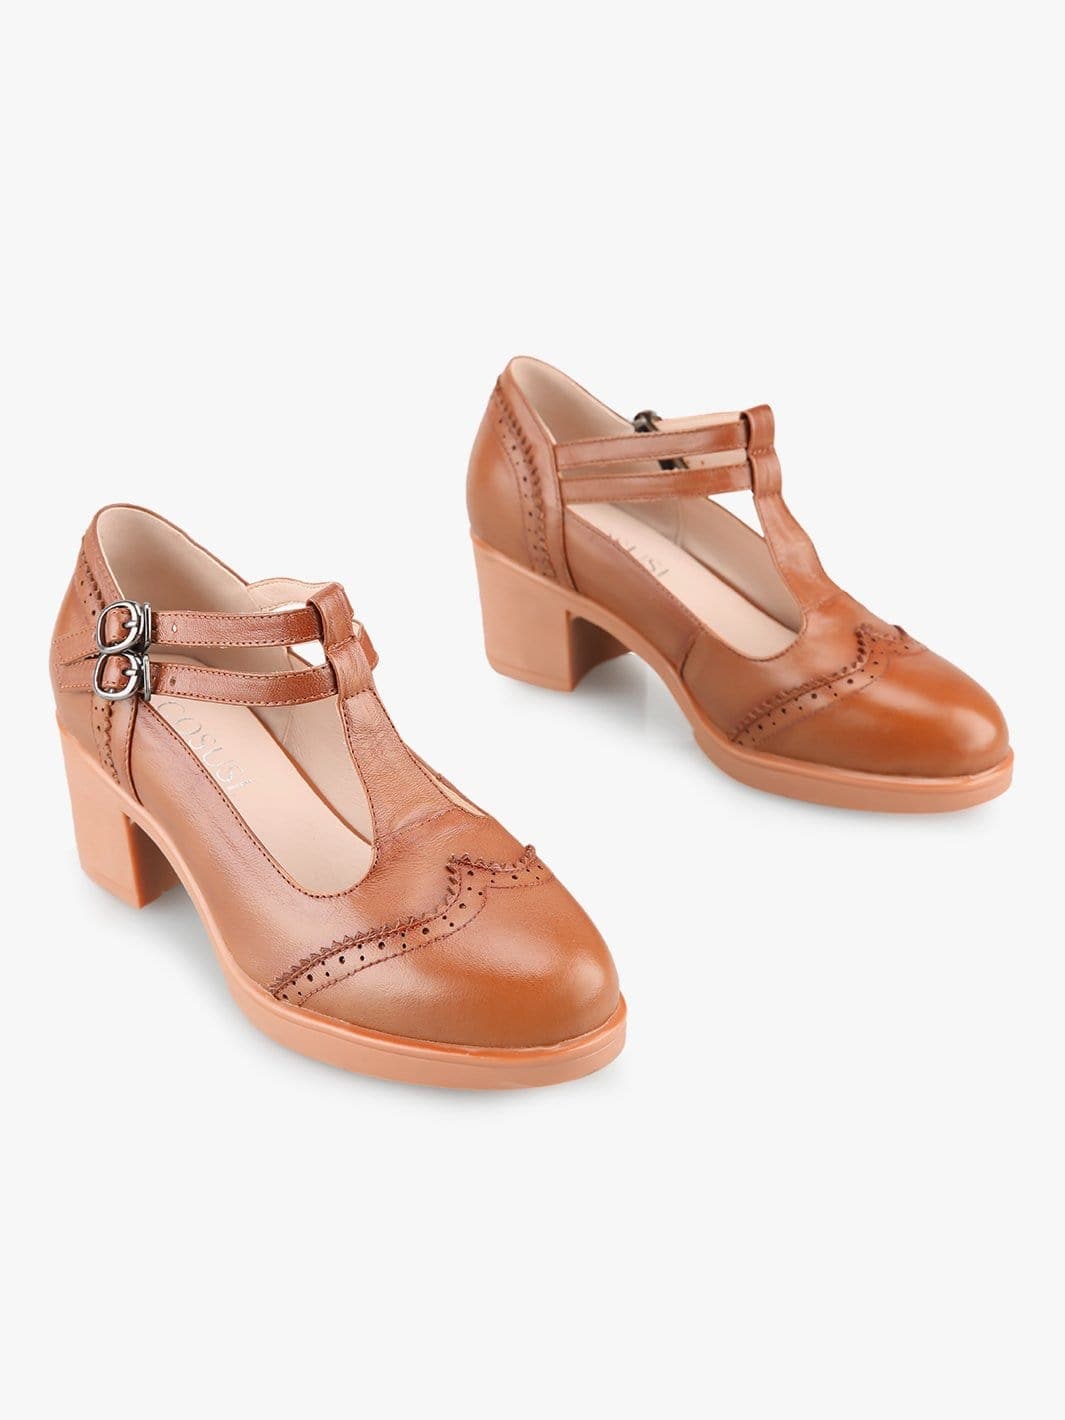 Women‘s Classic T-Strap Leather Shoes